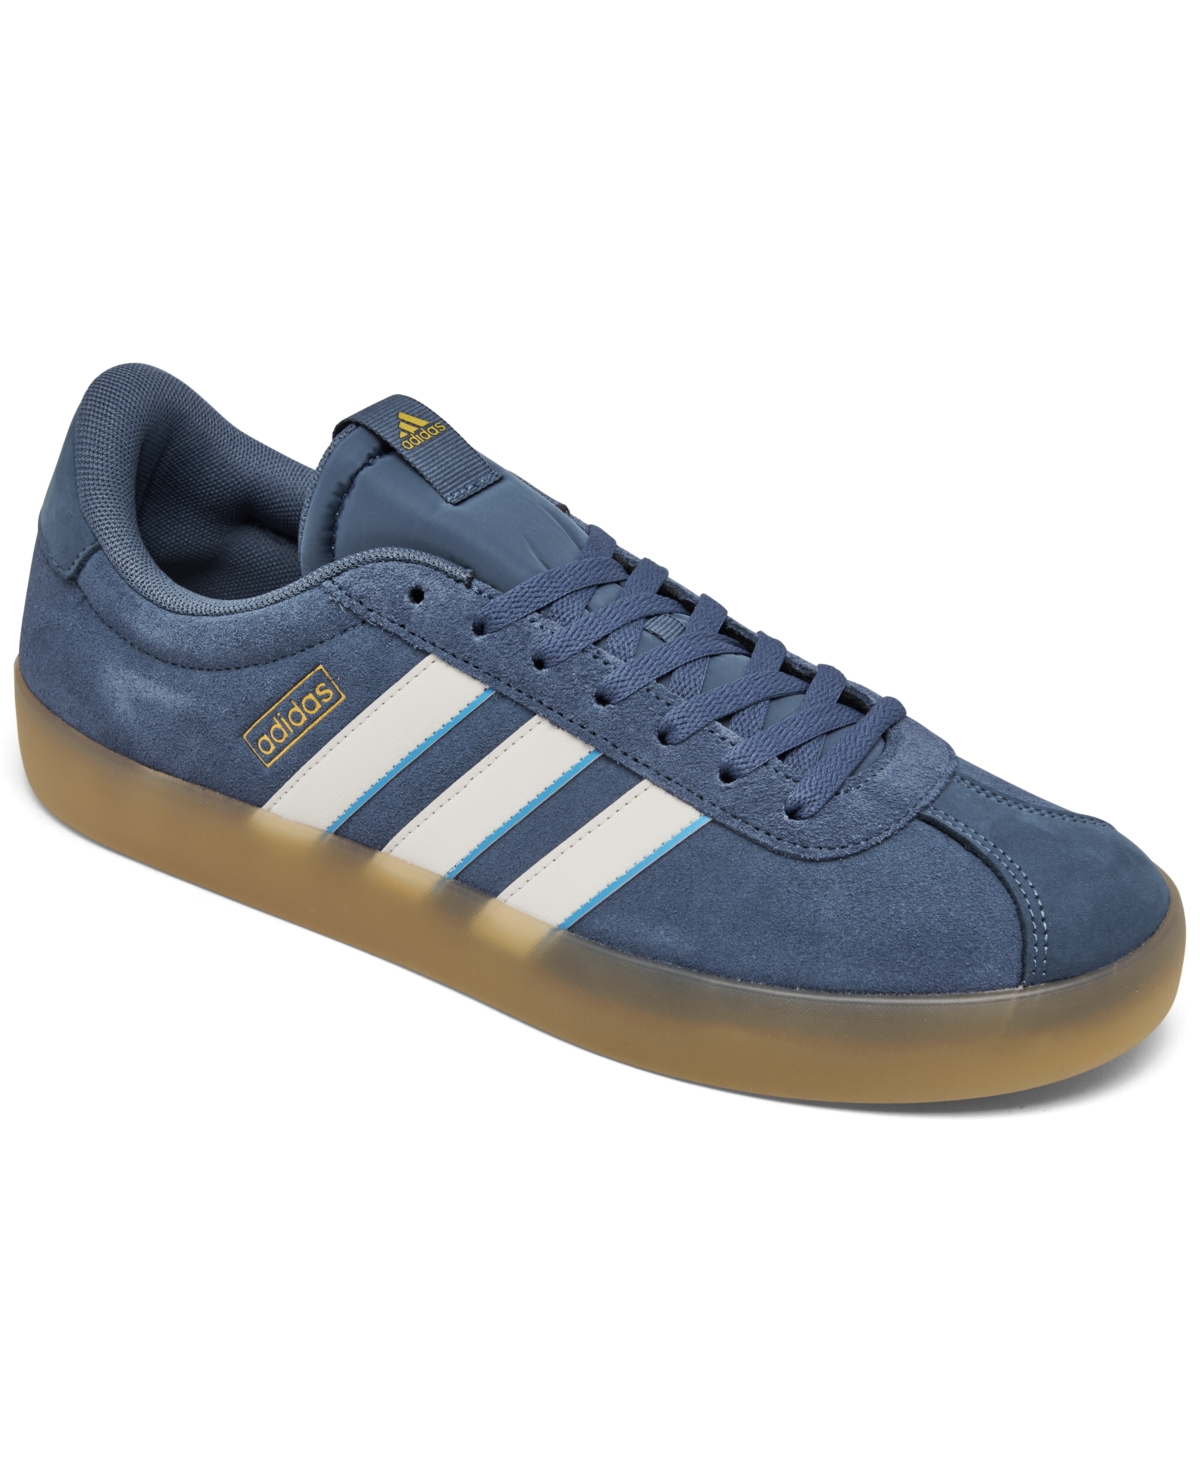 Adidas Originals Men's Vl Court 3.0 Casual Sneakers From Finish Line In Ink,off White,gum